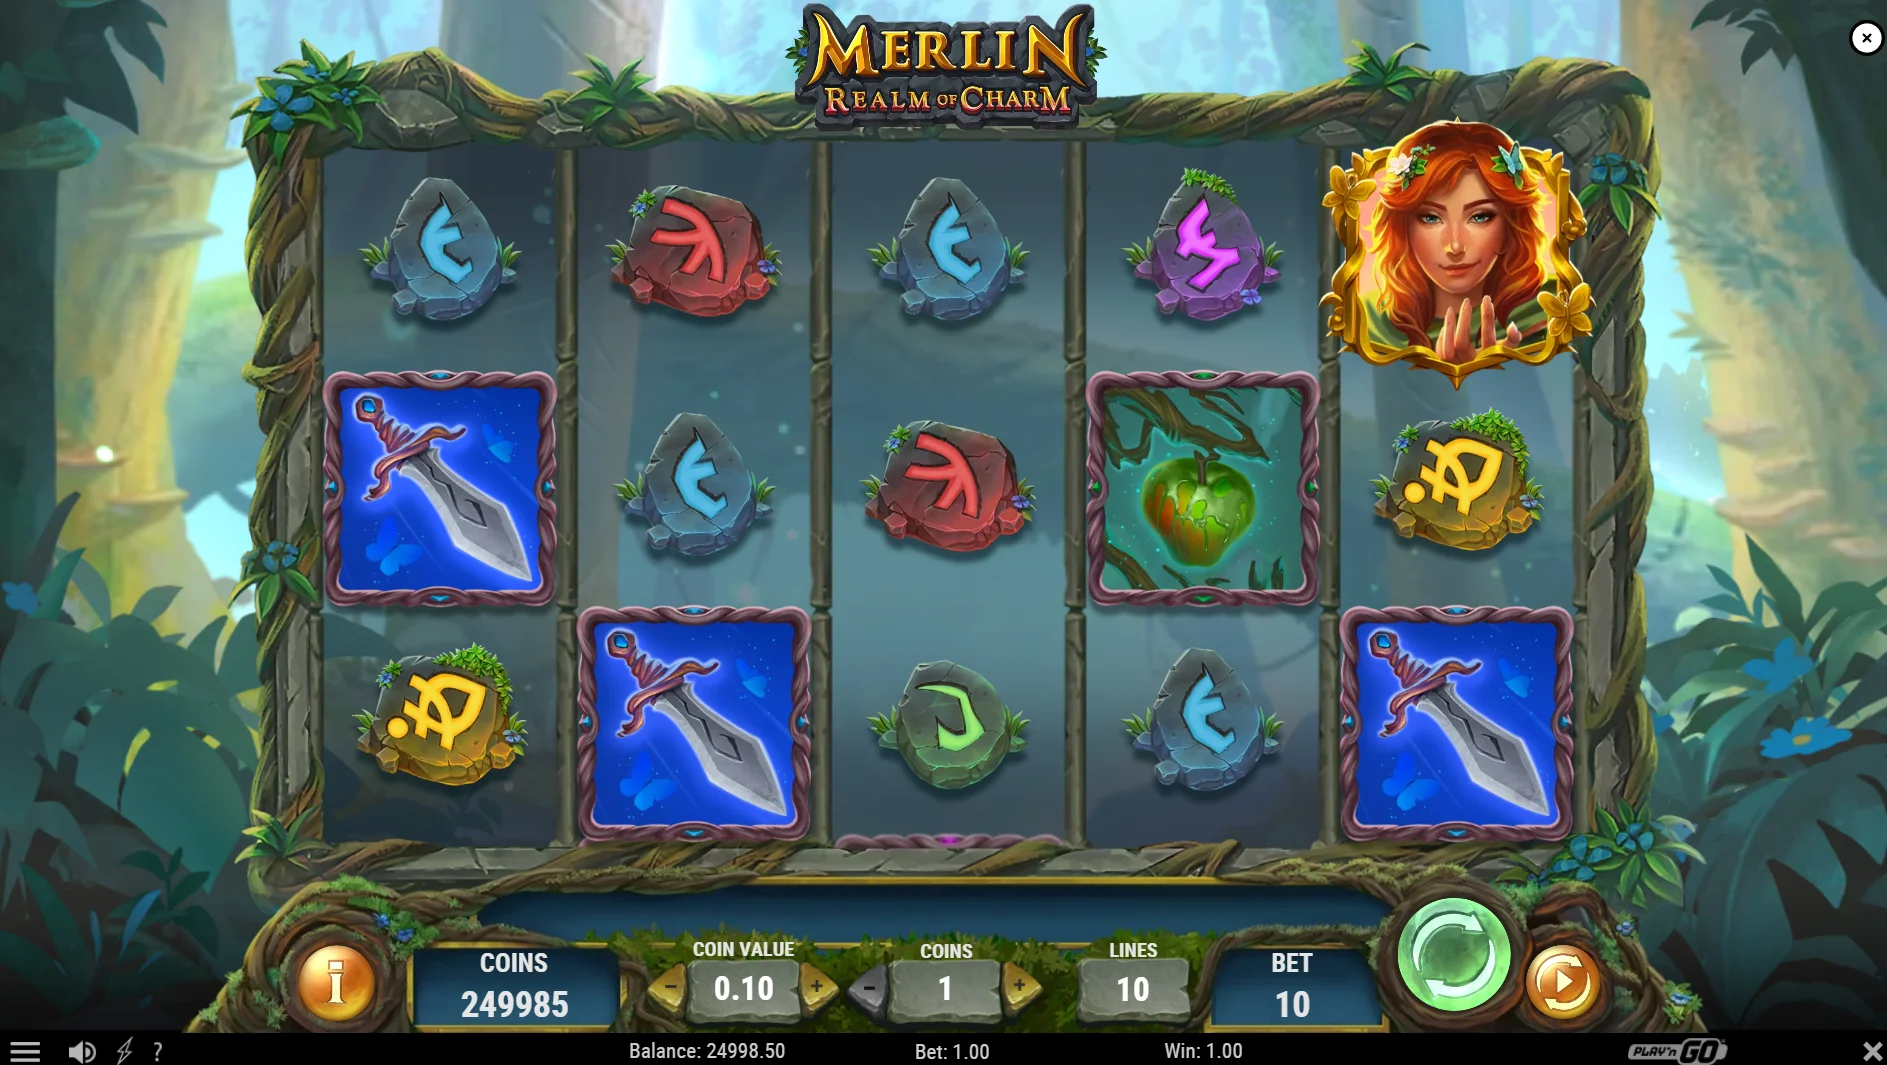 Merlin Realm of Charm Base Game play